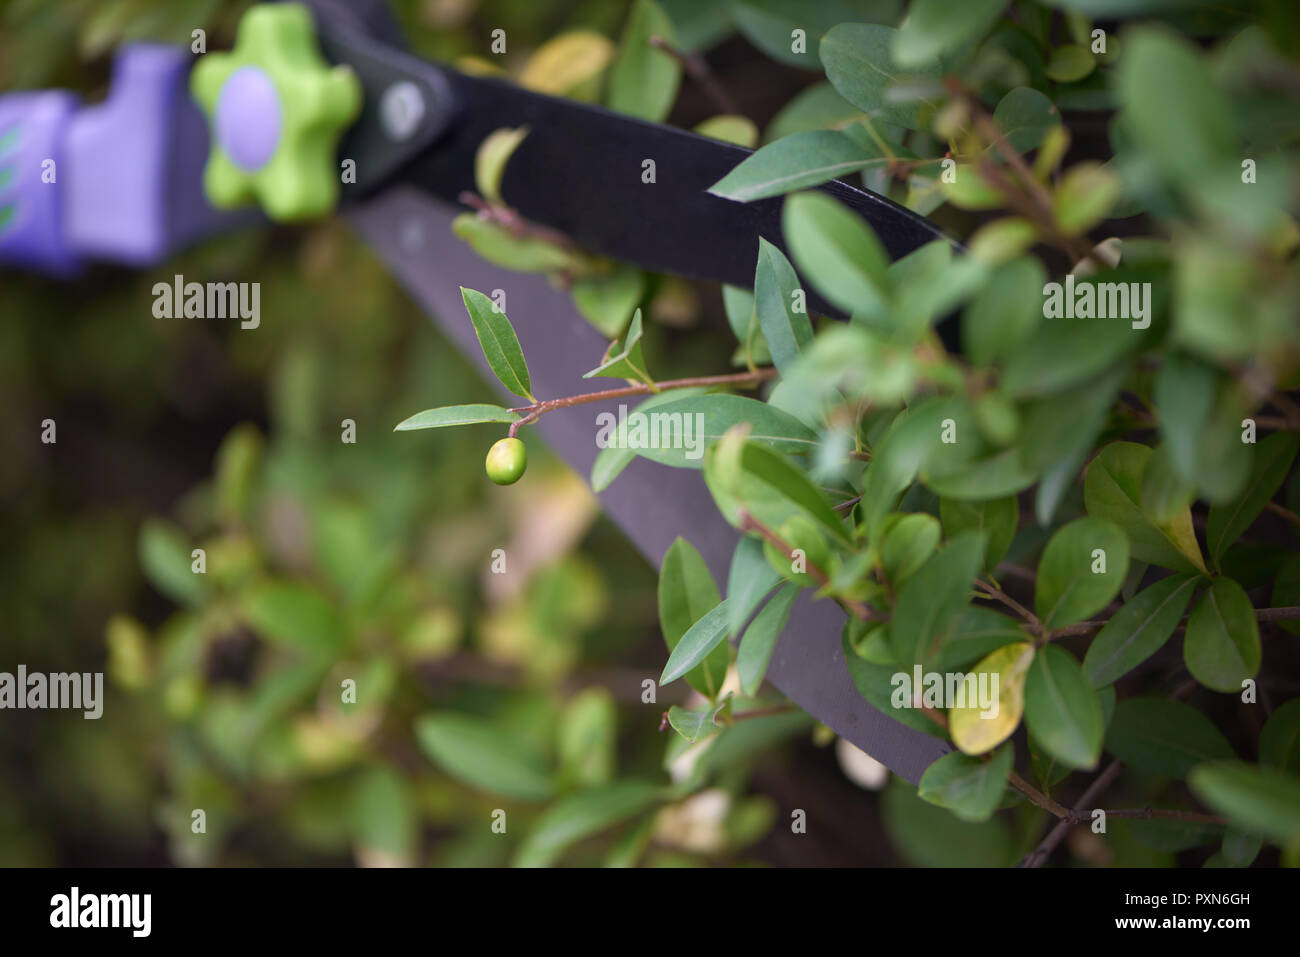 Close up of blade of garden scissors cutting off small berry on bush near house. Professional gardener working with professional tools, bringing bushes to ideally flat fence. Seasonal work concept. Stock Photo